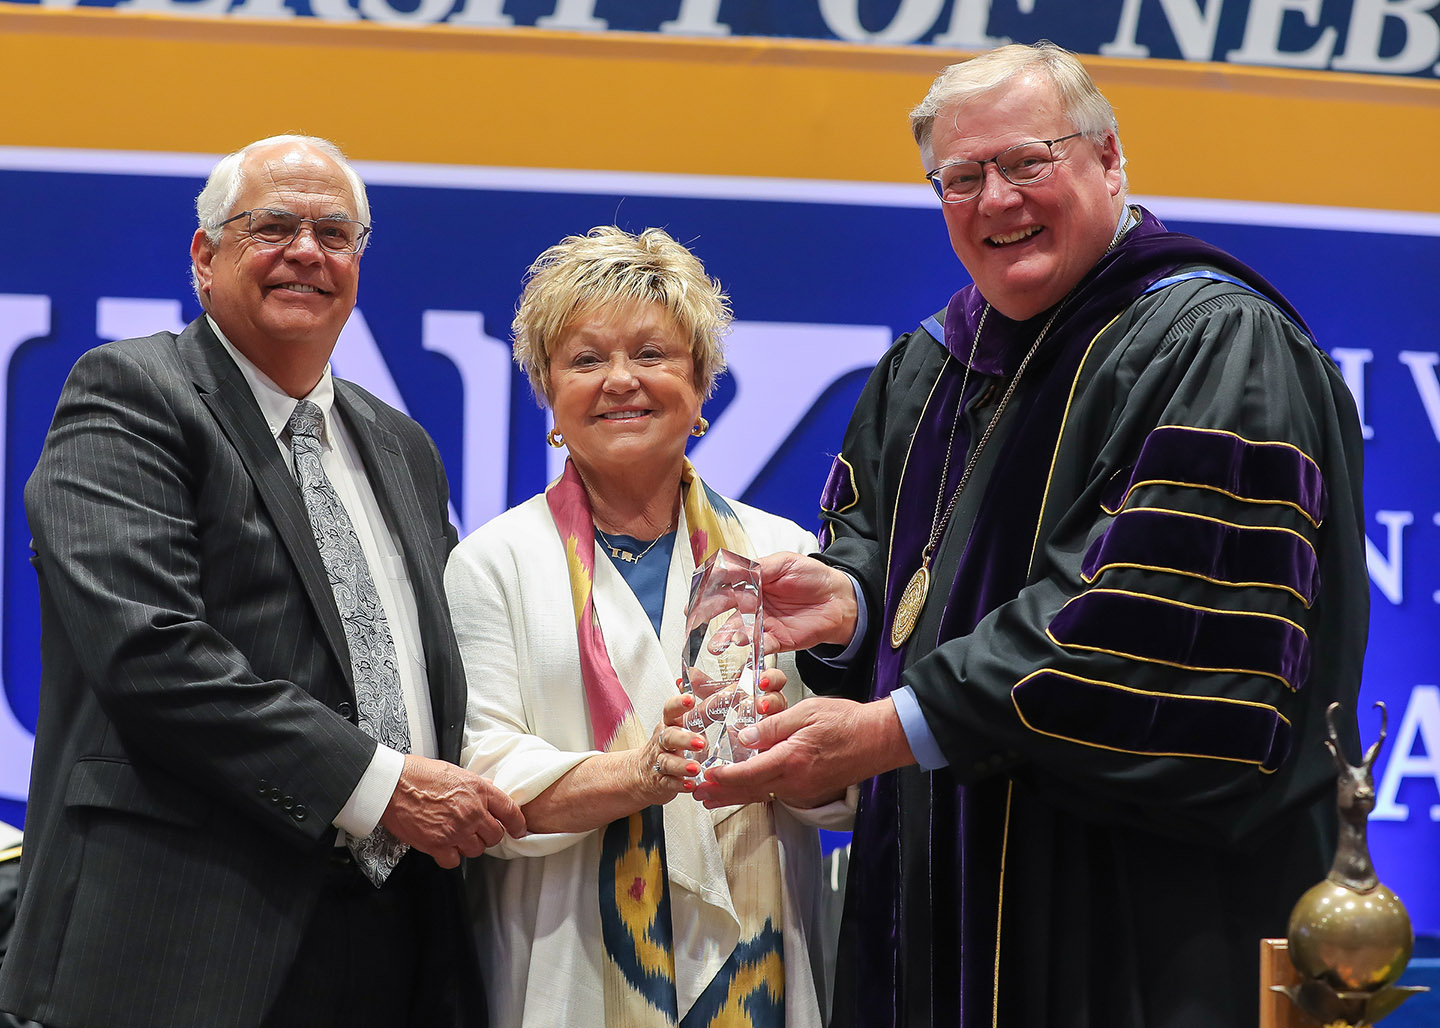 UNK Chancellor Doug Kristensen, right, presents the Ron and Carol Cope Cornerstone of Excellence Award to Tami and Jerry Hellman during Friday’s spring commencement ceremony at UNK.